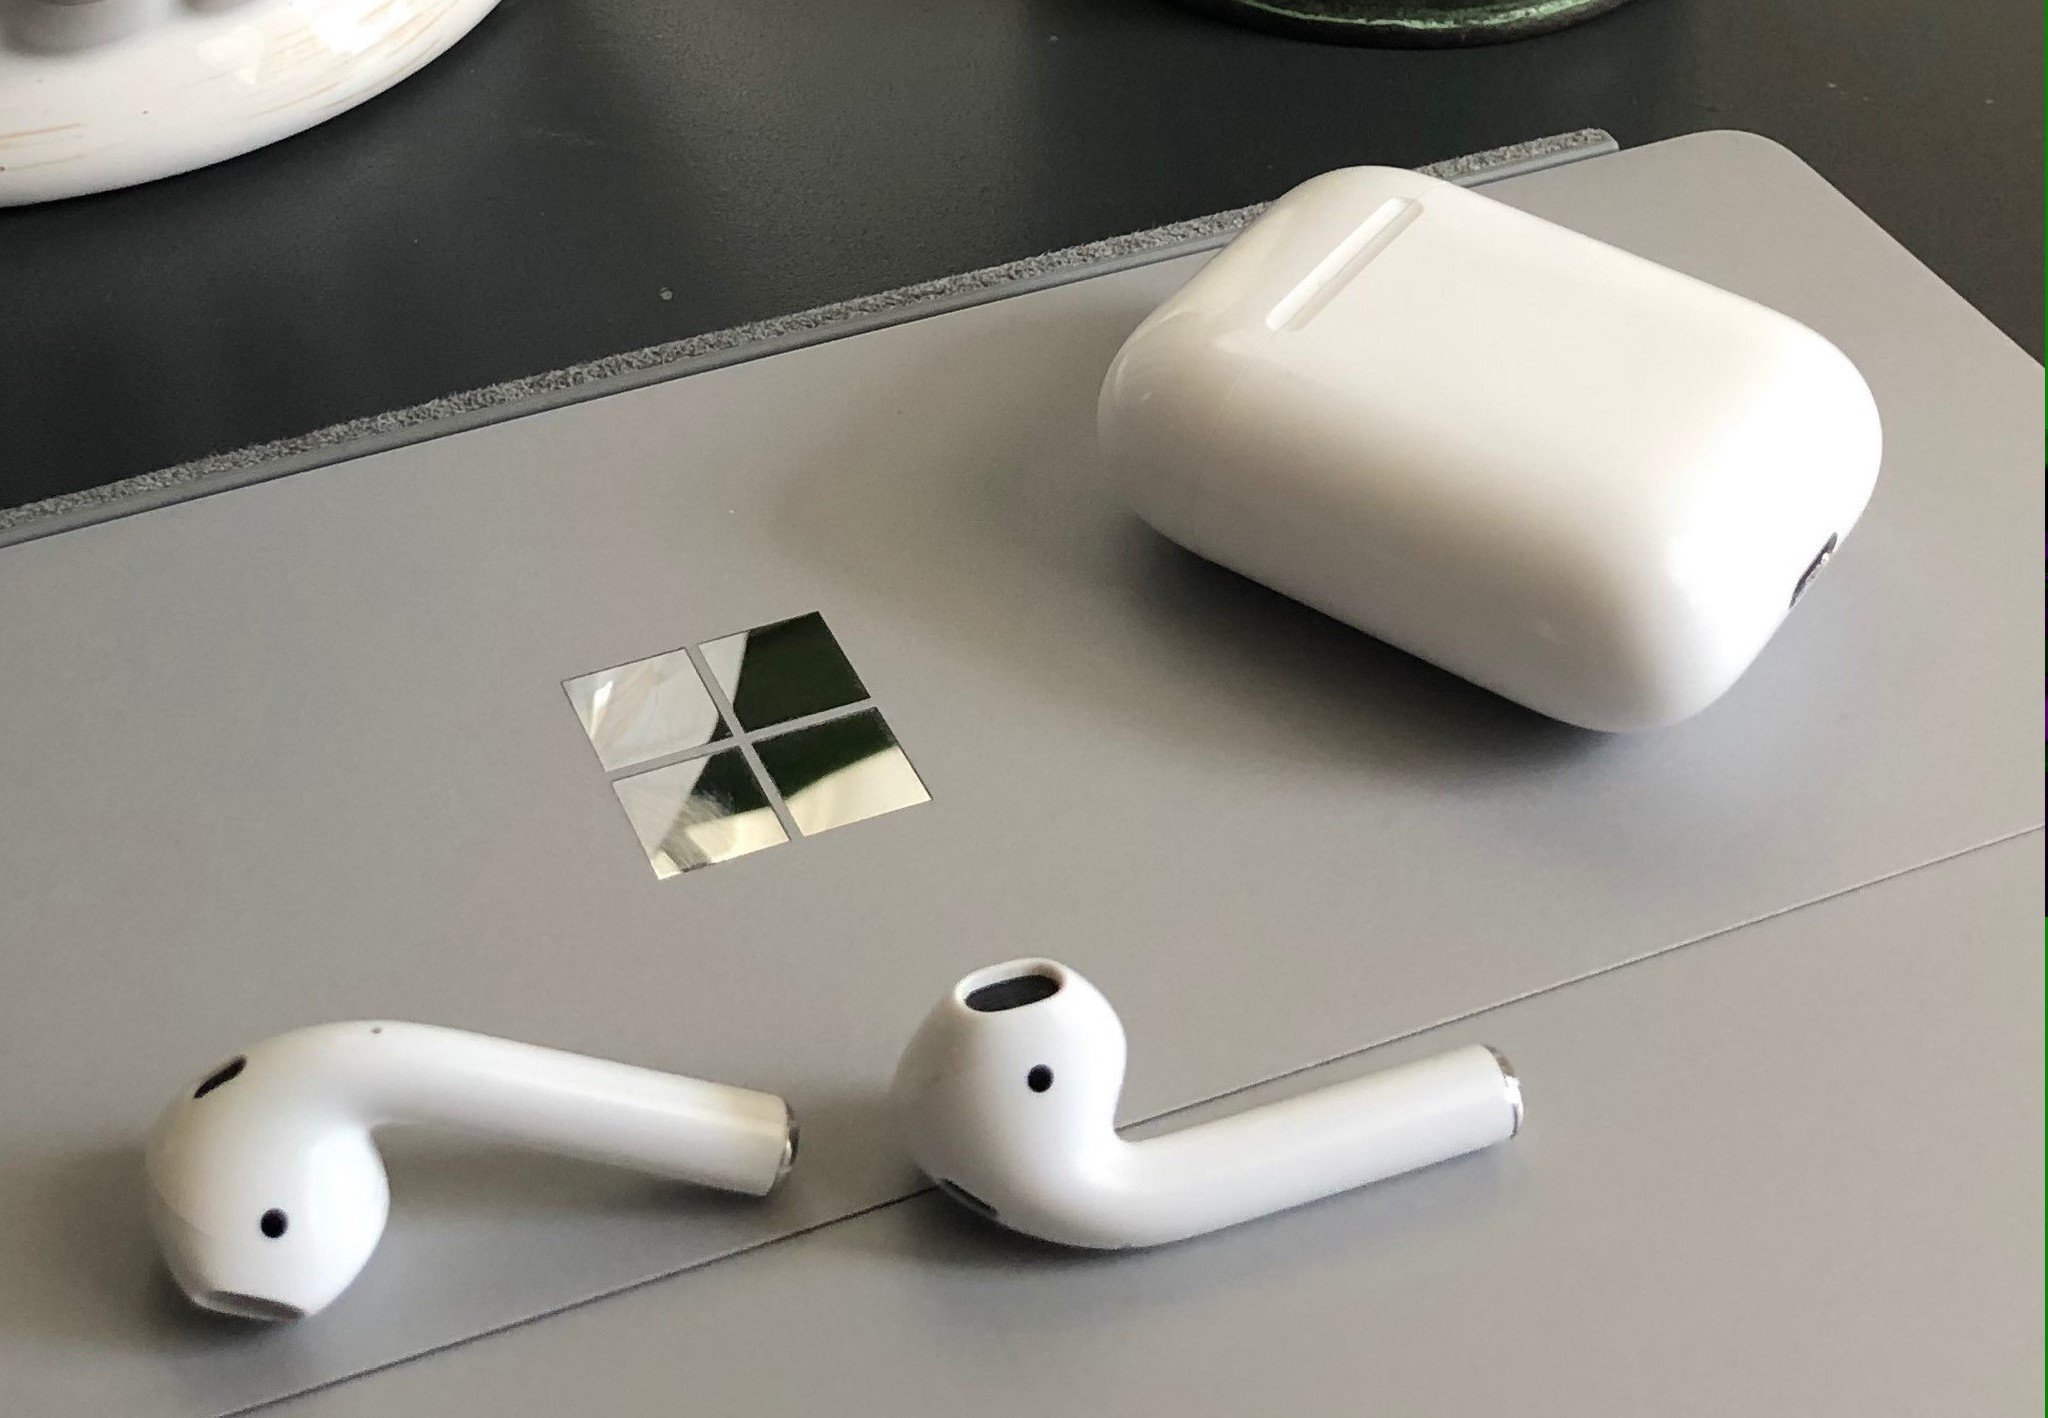 to Apple AirPods with Windows PC | Windows Central